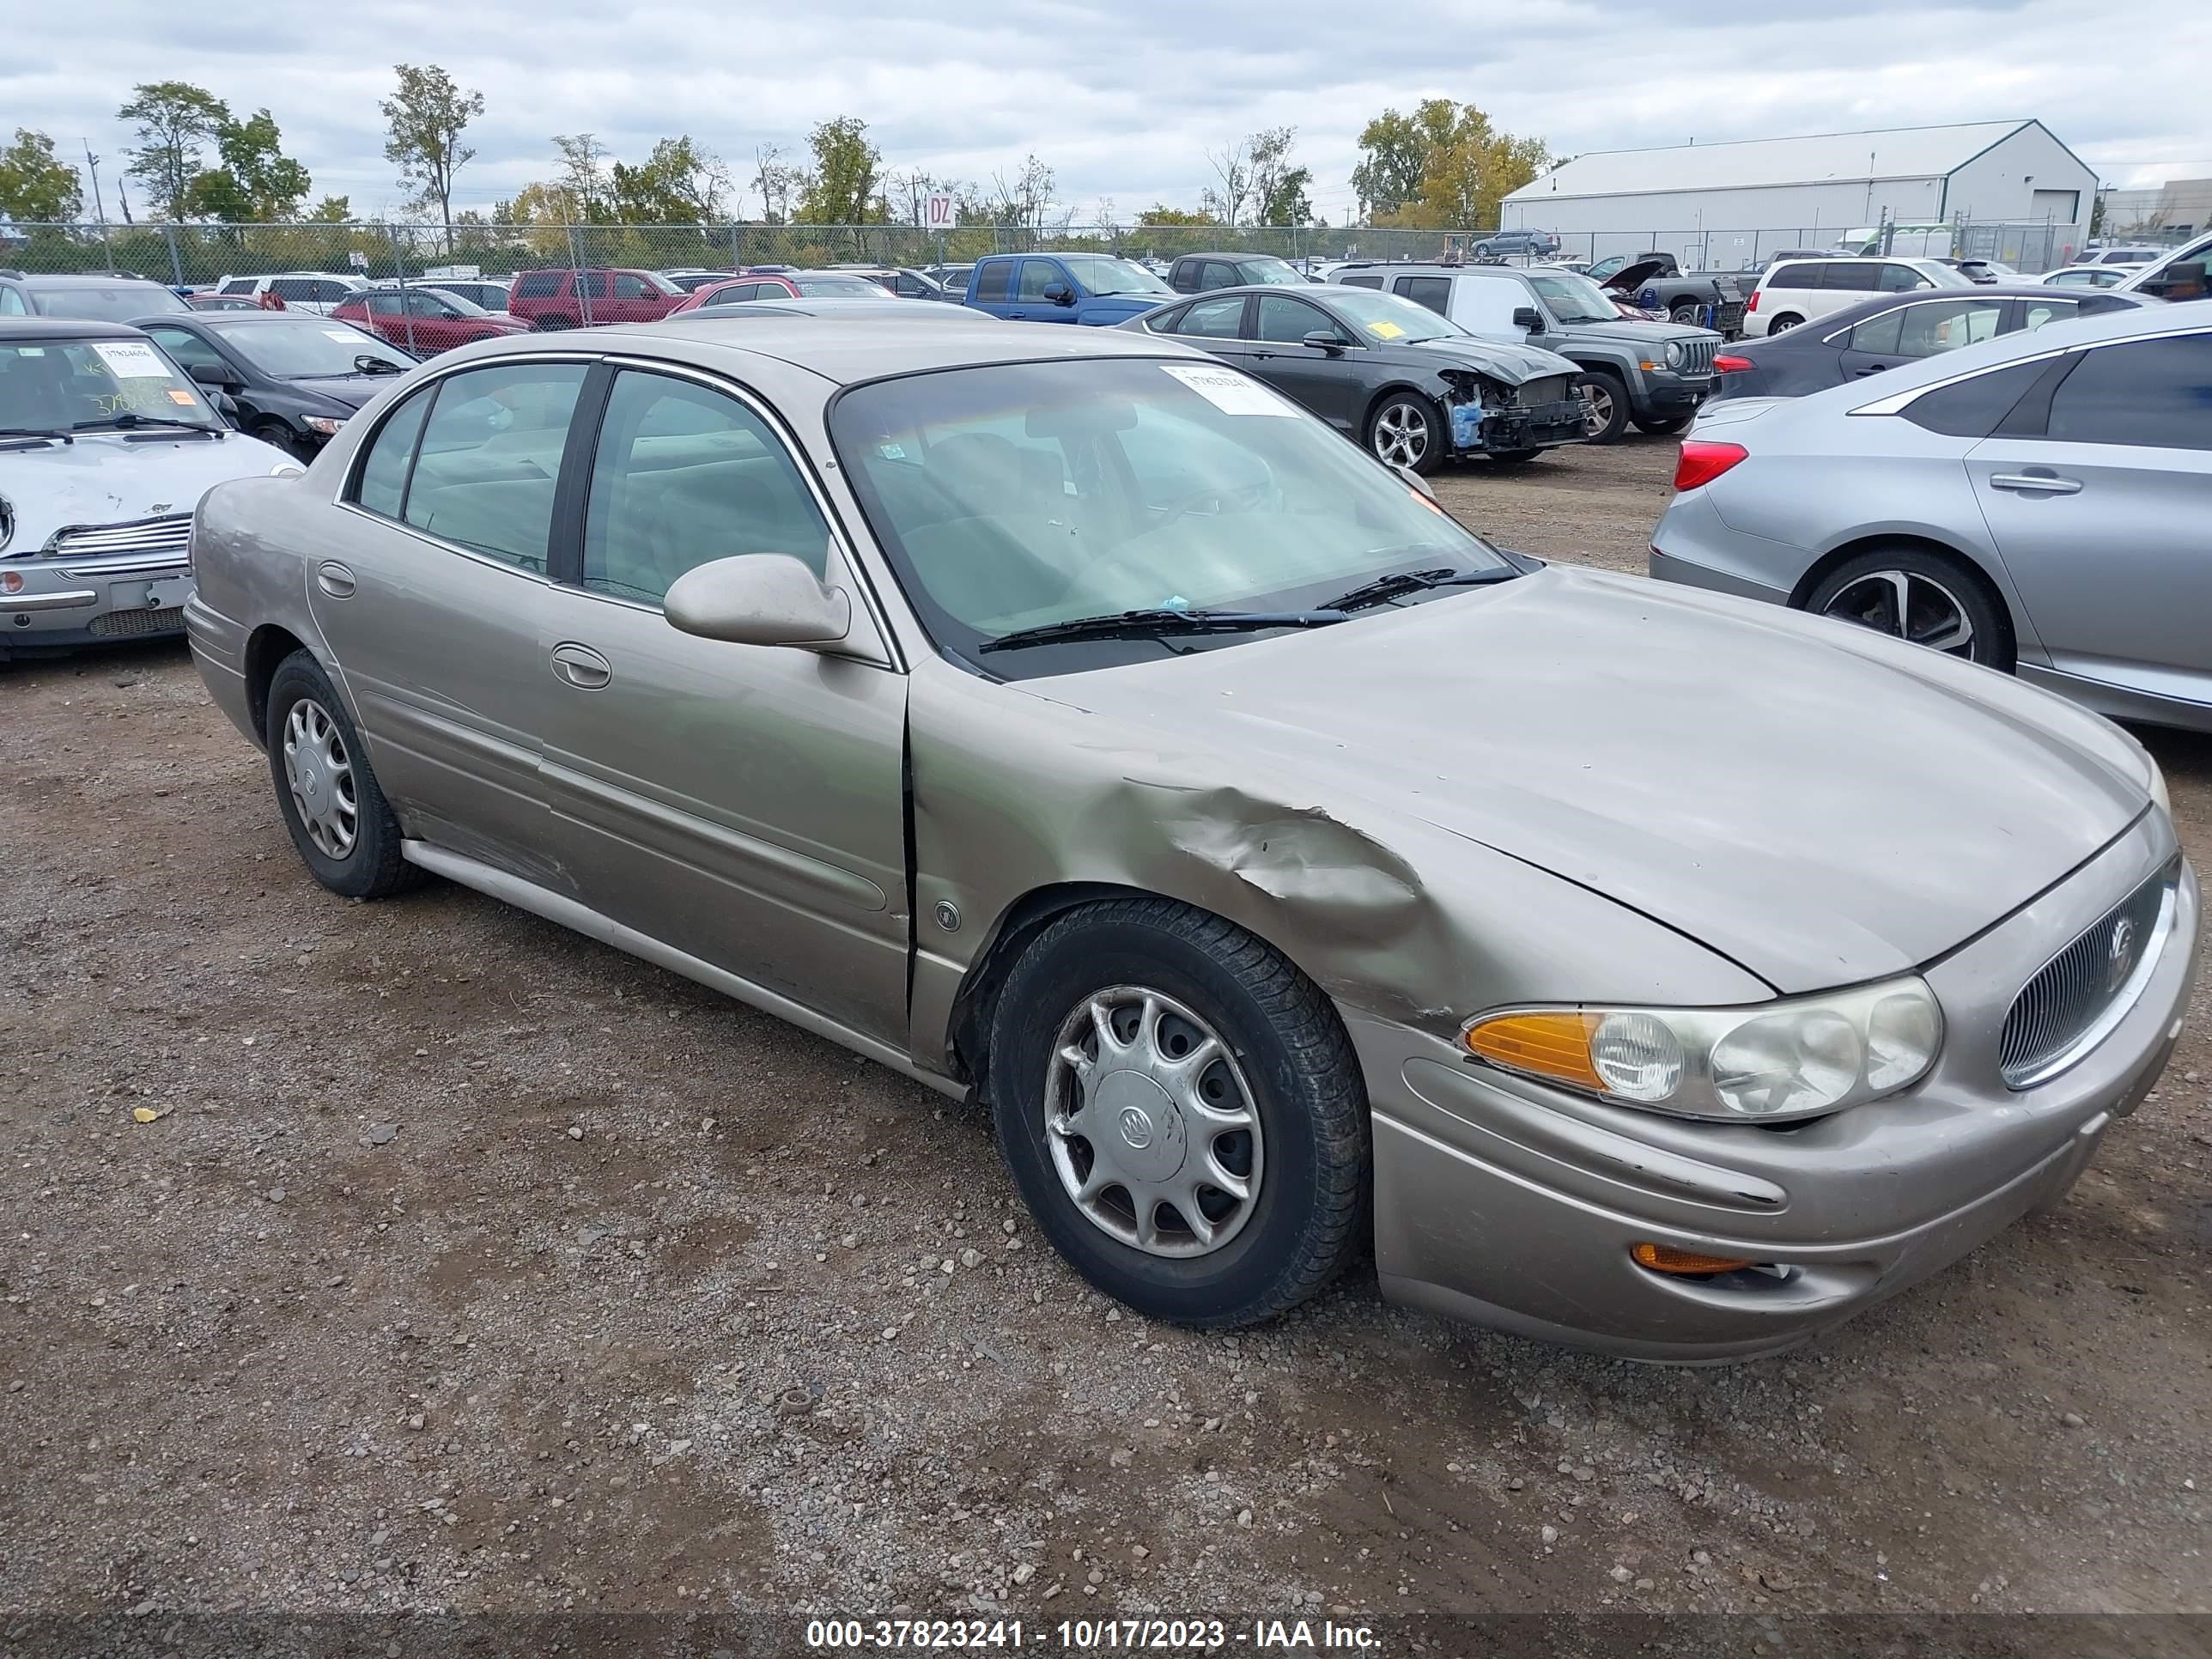 vin: 1G4HP52K244144377 1G4HP52K244144377 2004 buick lesabre 3800 for Sale in 45069, 10100 Windisch Rd, West Chester, USA